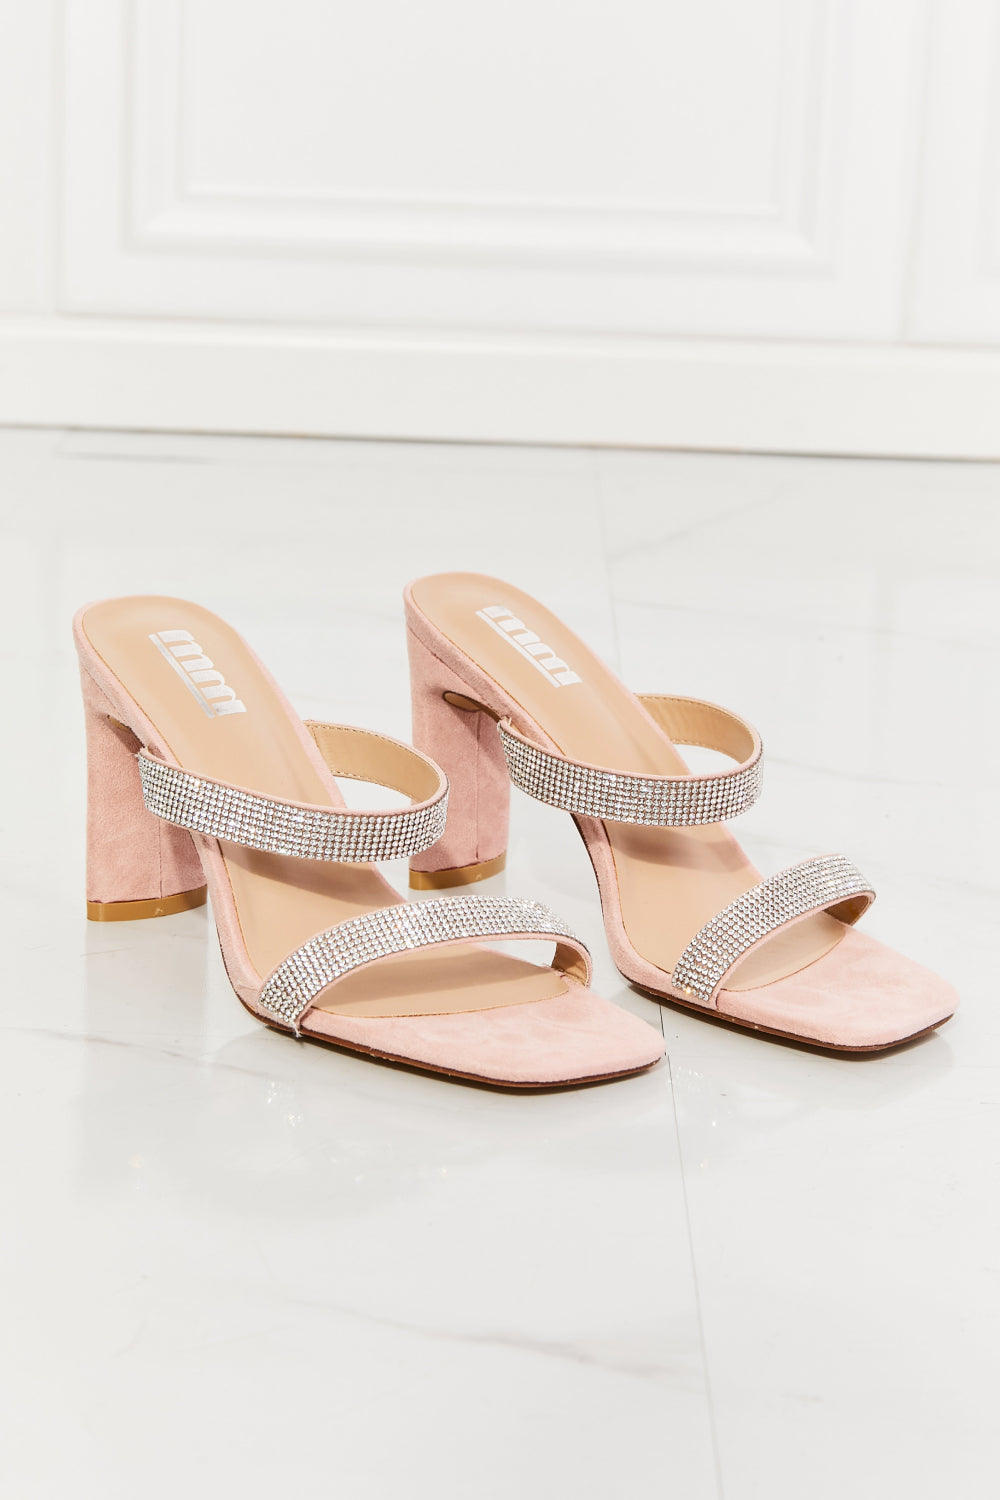 MMShoes Leave A Little Sparkle Rhinestone Block Heel Sandal in Pink - Cheeky Chic Boutique